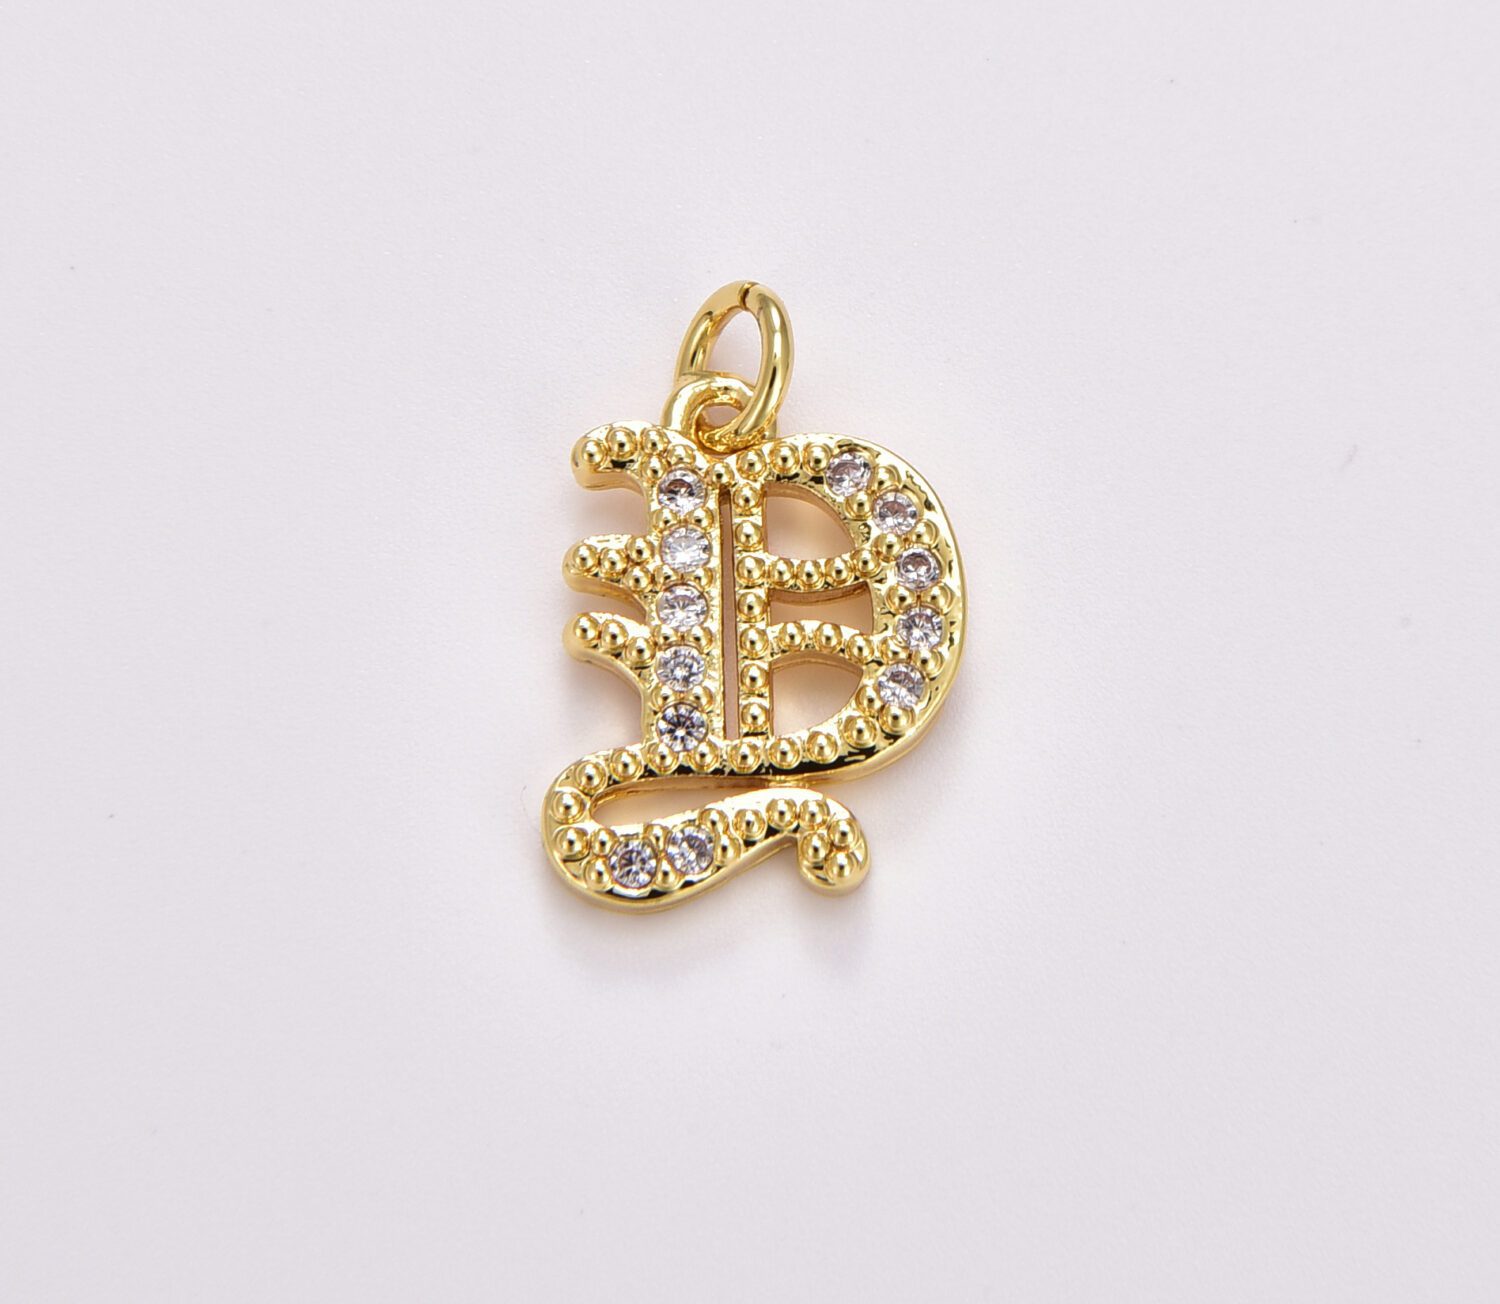 14K REAL Diamond Gothic Initial Charm Pendant Real Solid Gold Natural  Genuine Diamond Old English Initial Charm Pendant for Chain Necklace